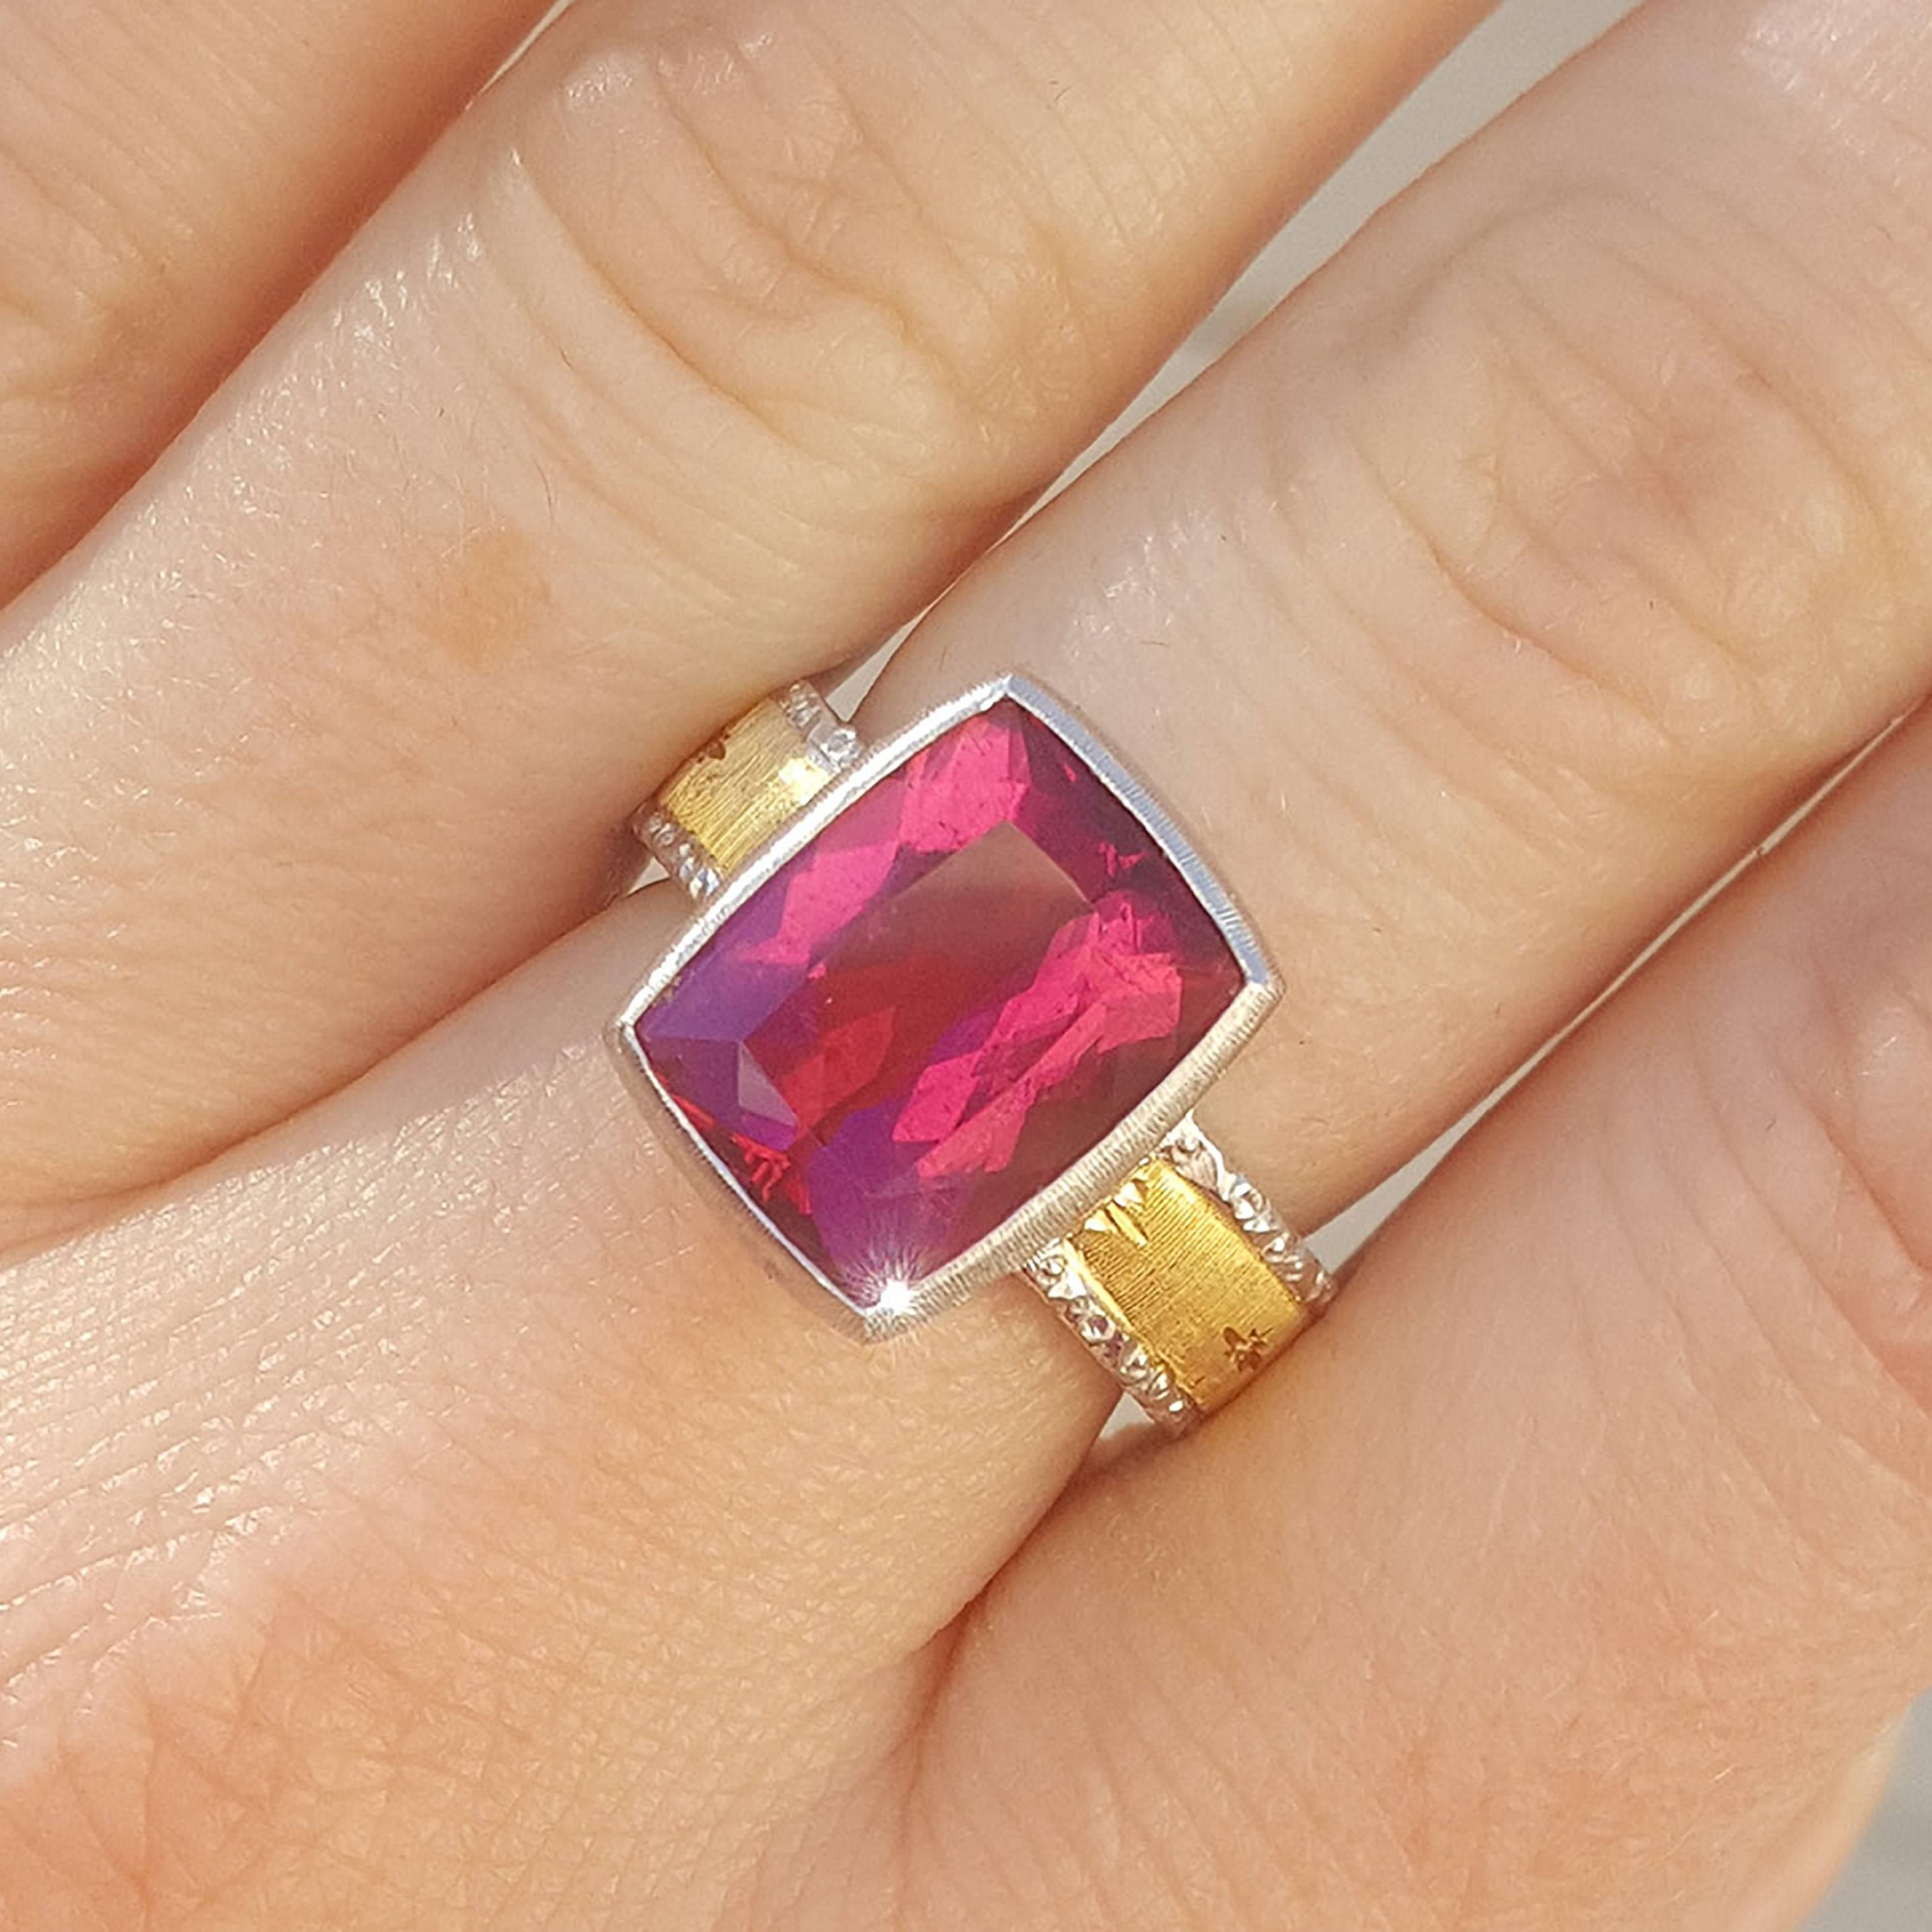 This ring features a richly hued rubellite tourmaline is an eye-popping shade of hot pink. Big and fearless, with a beautiful cut, this gemstone will always draw attention.

